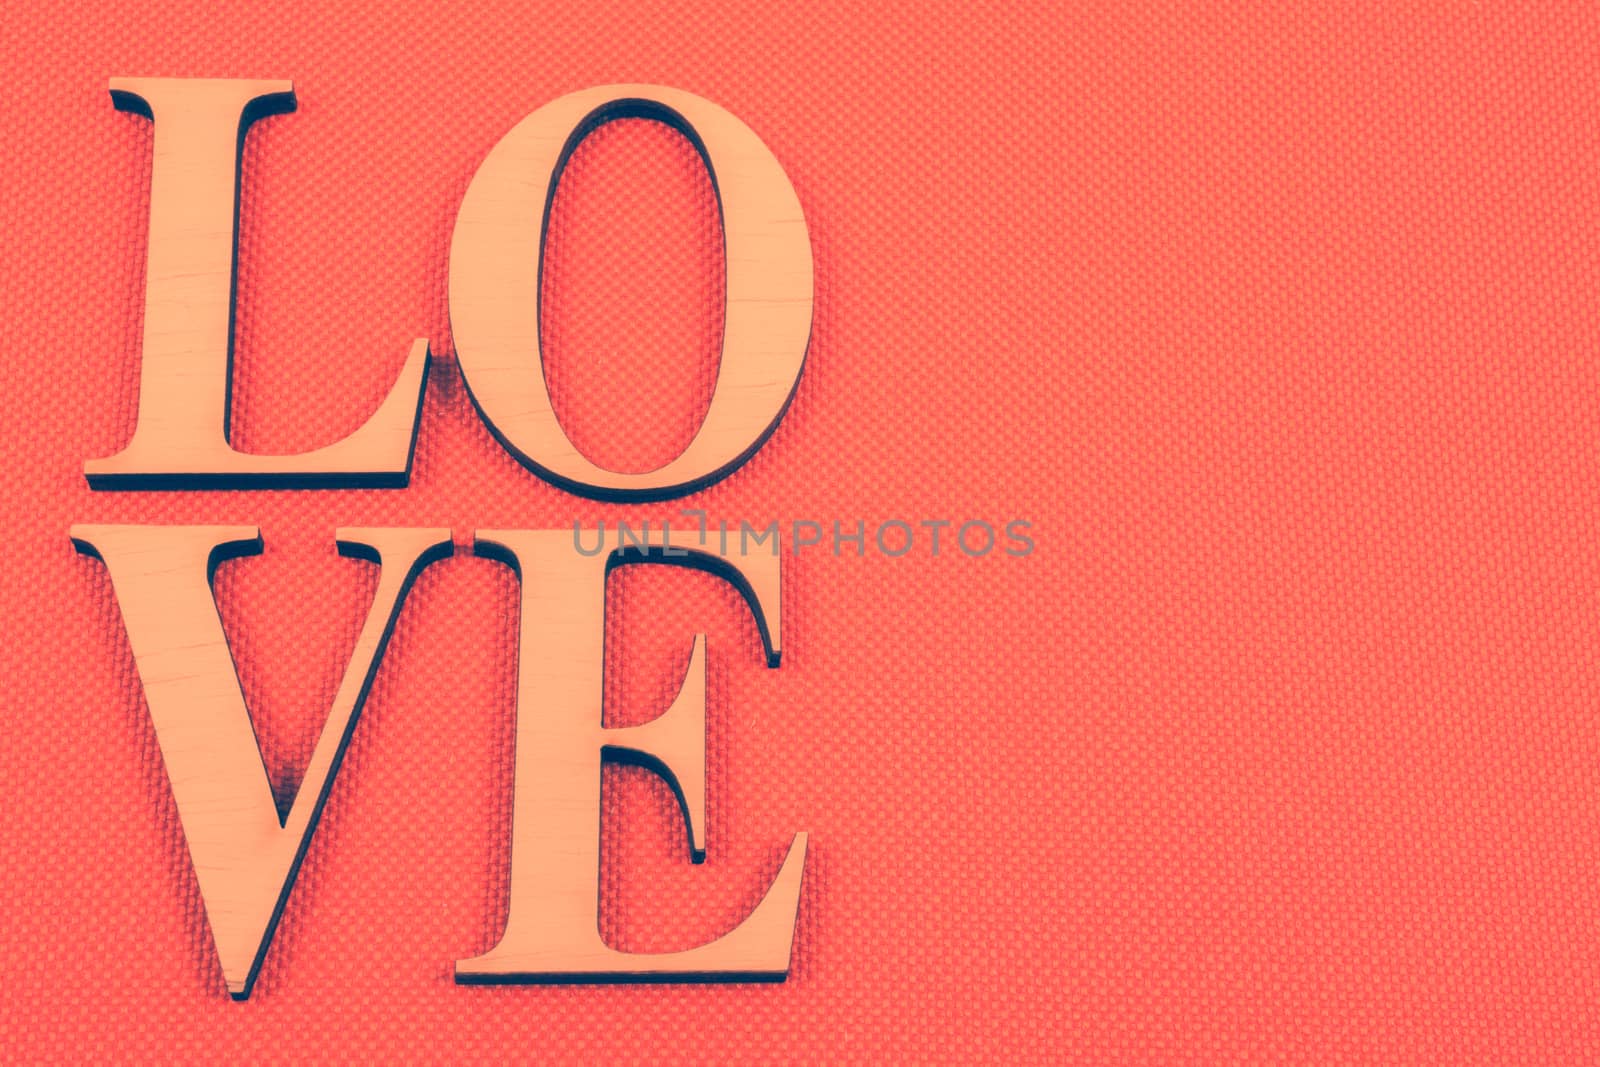 Wooden letters forming word LOVE written on orange background